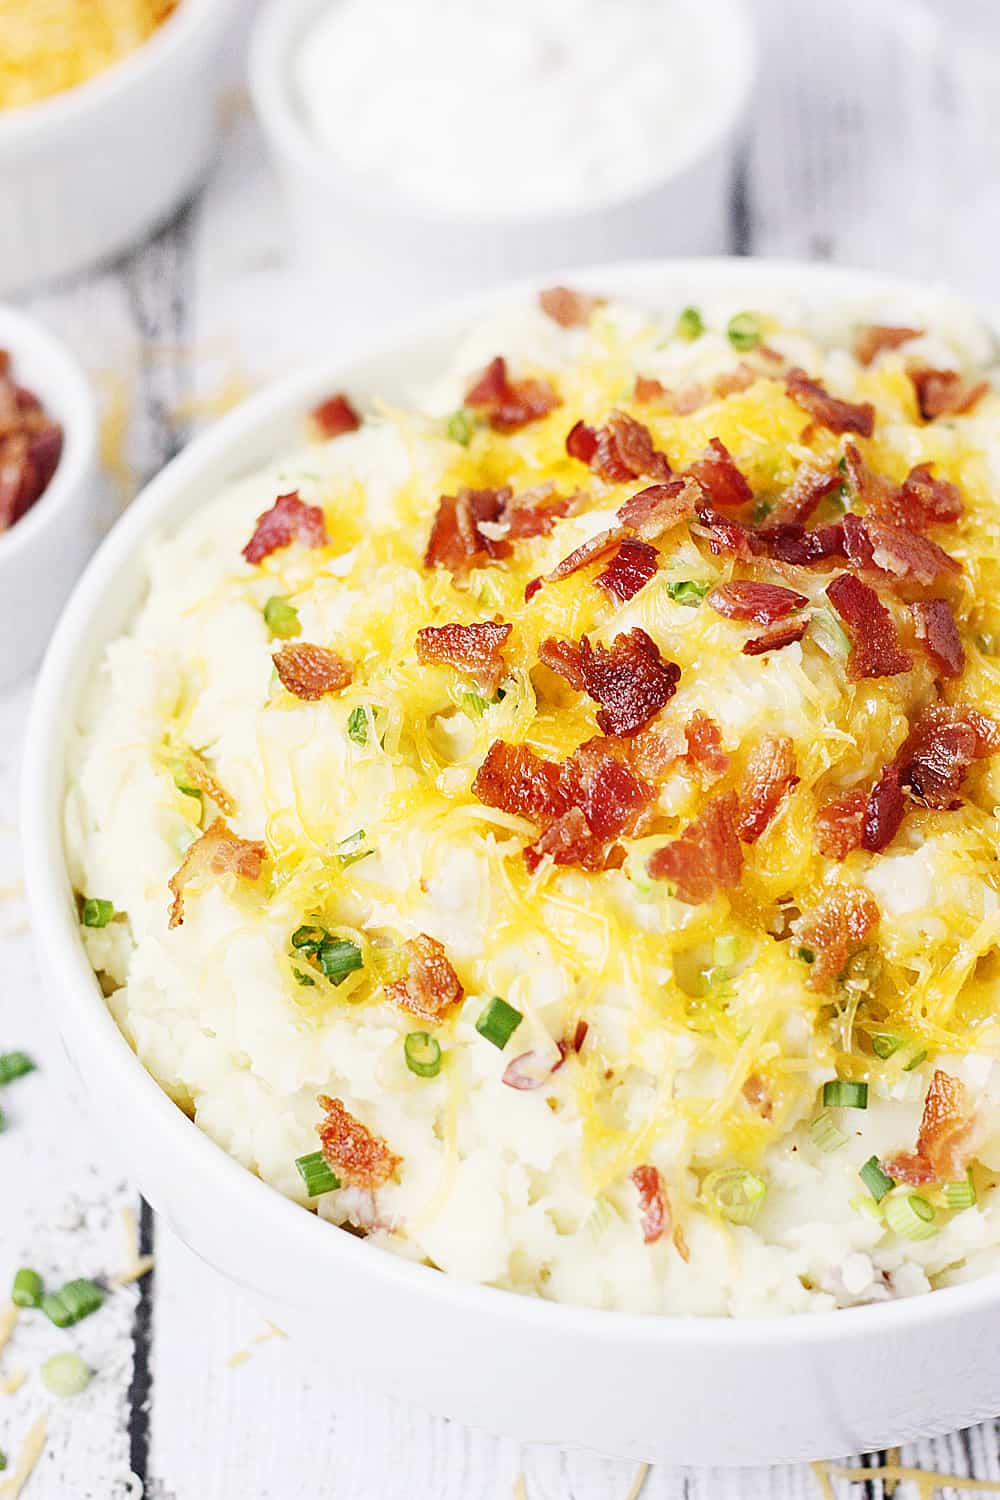 Instant Pot Mashed Potatoes with Cheddar Bacon and Onion -- Instant Pot mashed potatoes with cheddar, bacon and onion are my new favorite side dish. They're creamy, packed with delicious flavors, and an ideal Instant Pot recipe for newbies! | halfscratched.com #halfscratched #instantpot #pressurecooker #recipe